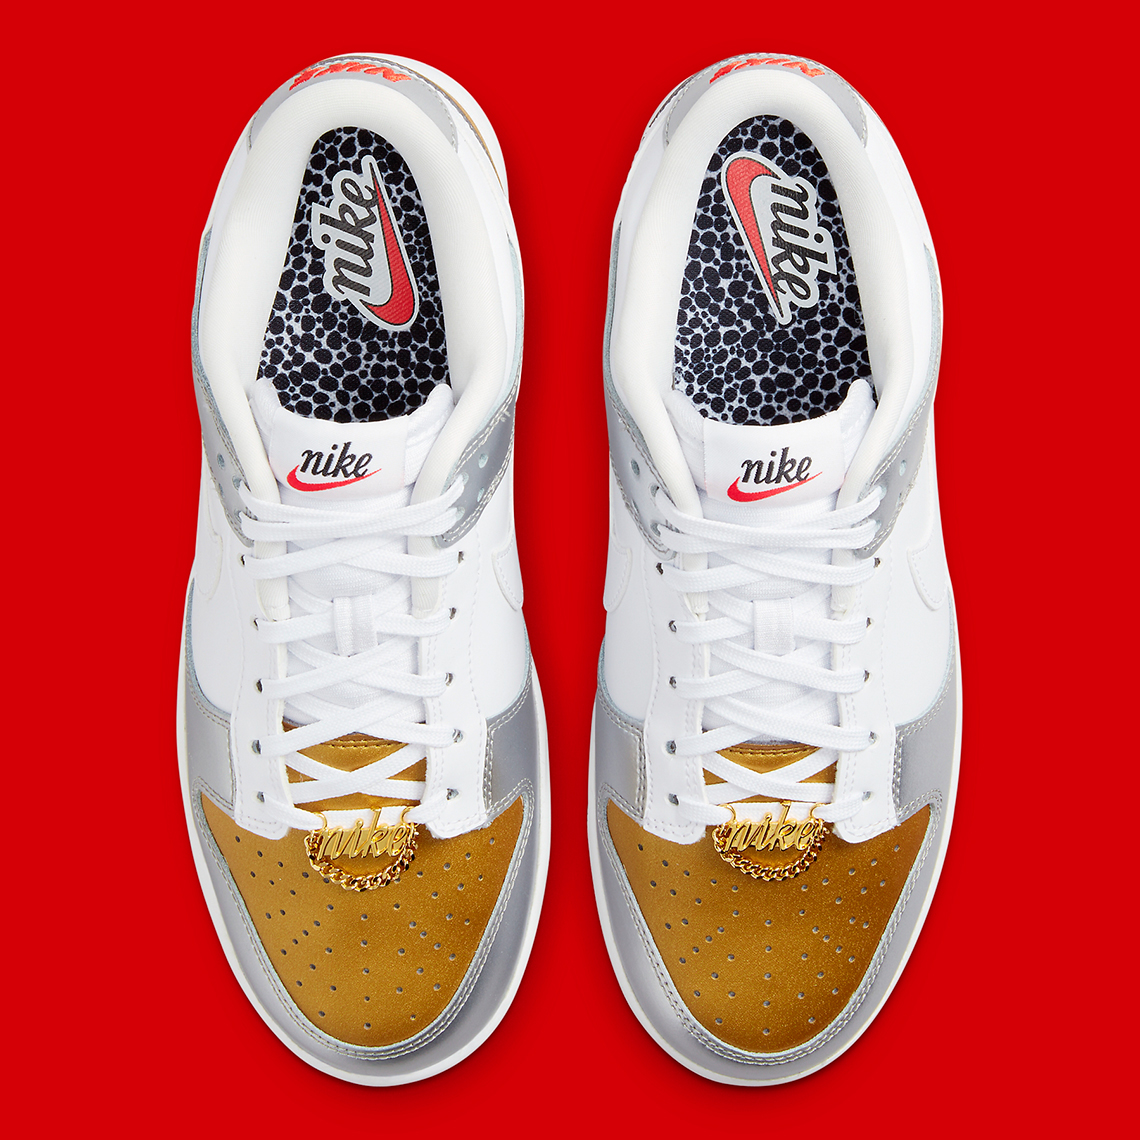 Nike Dunk Low WMNS Gold Silver DH4403 700 9